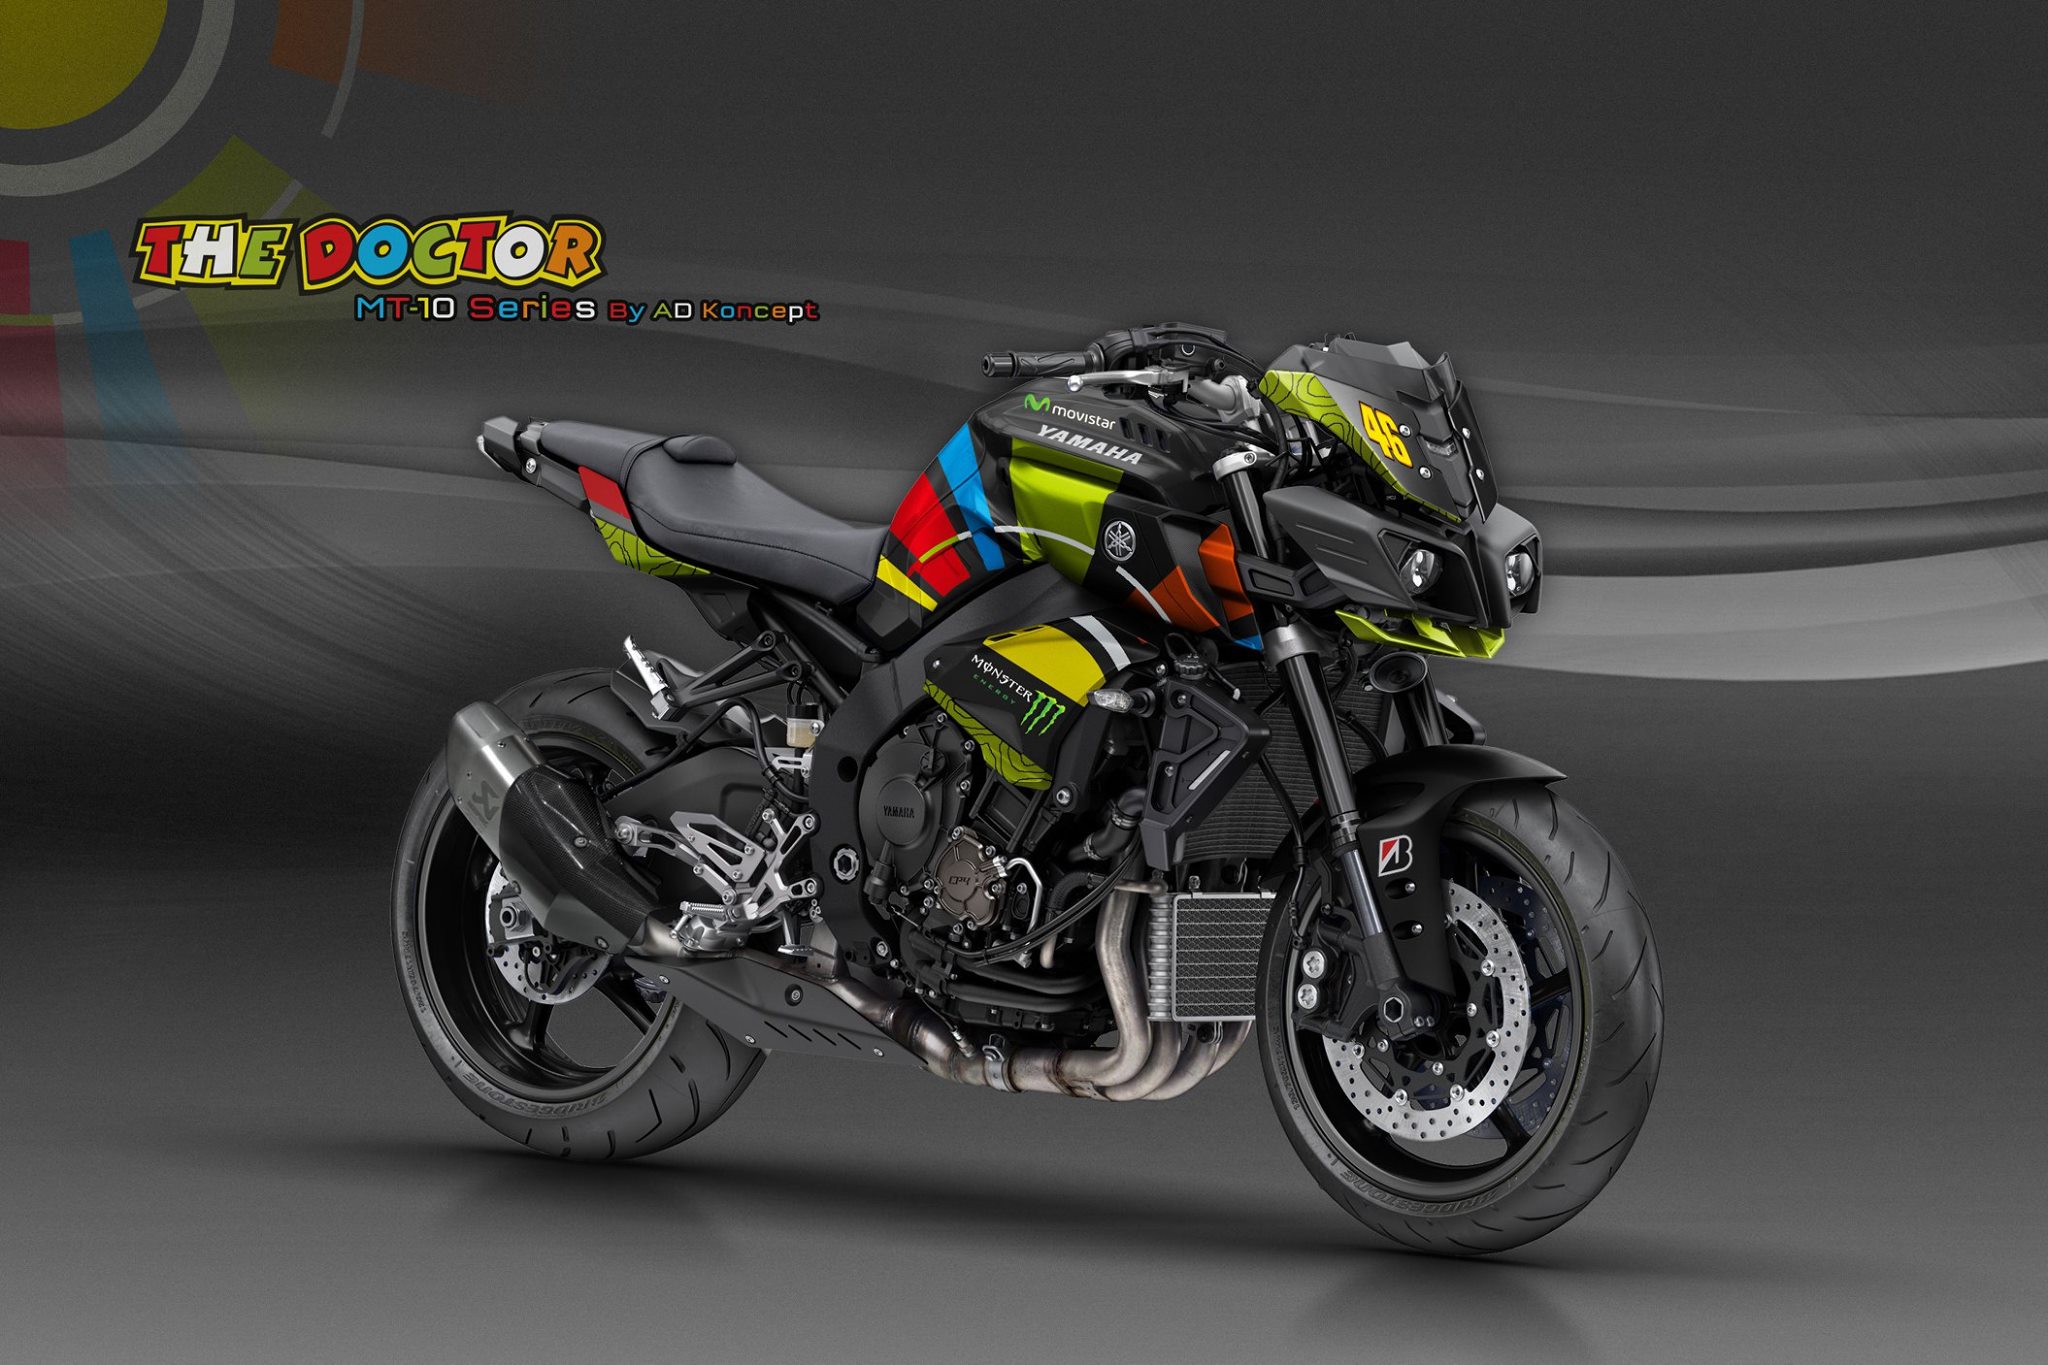 yamaha mt 10 in valentino rossi livery and more from ad koncept 5